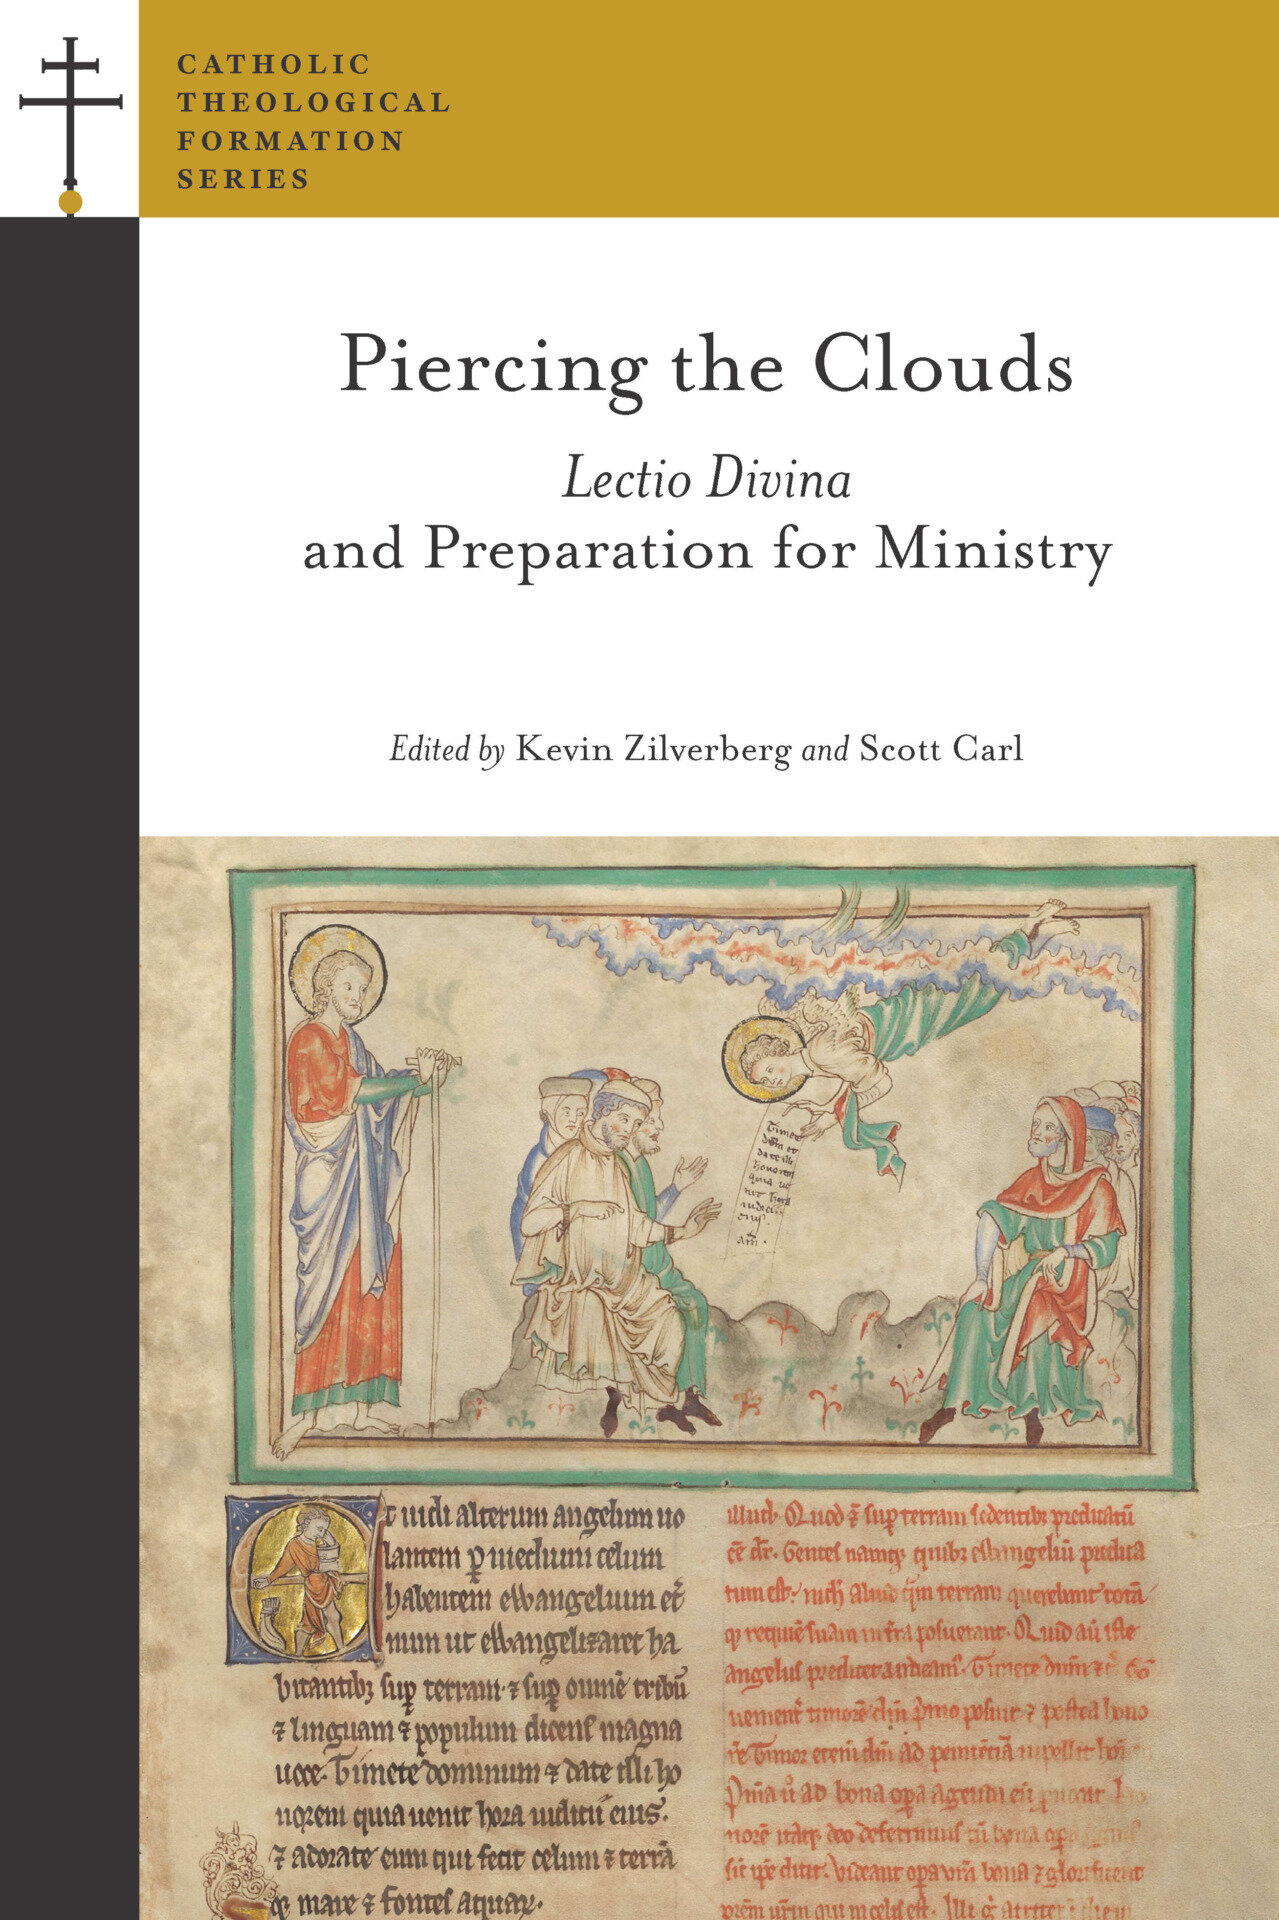 Piercing the Clouds: Lectio Divina and Preparation for Ministry (Catholic Theological Formation Series)